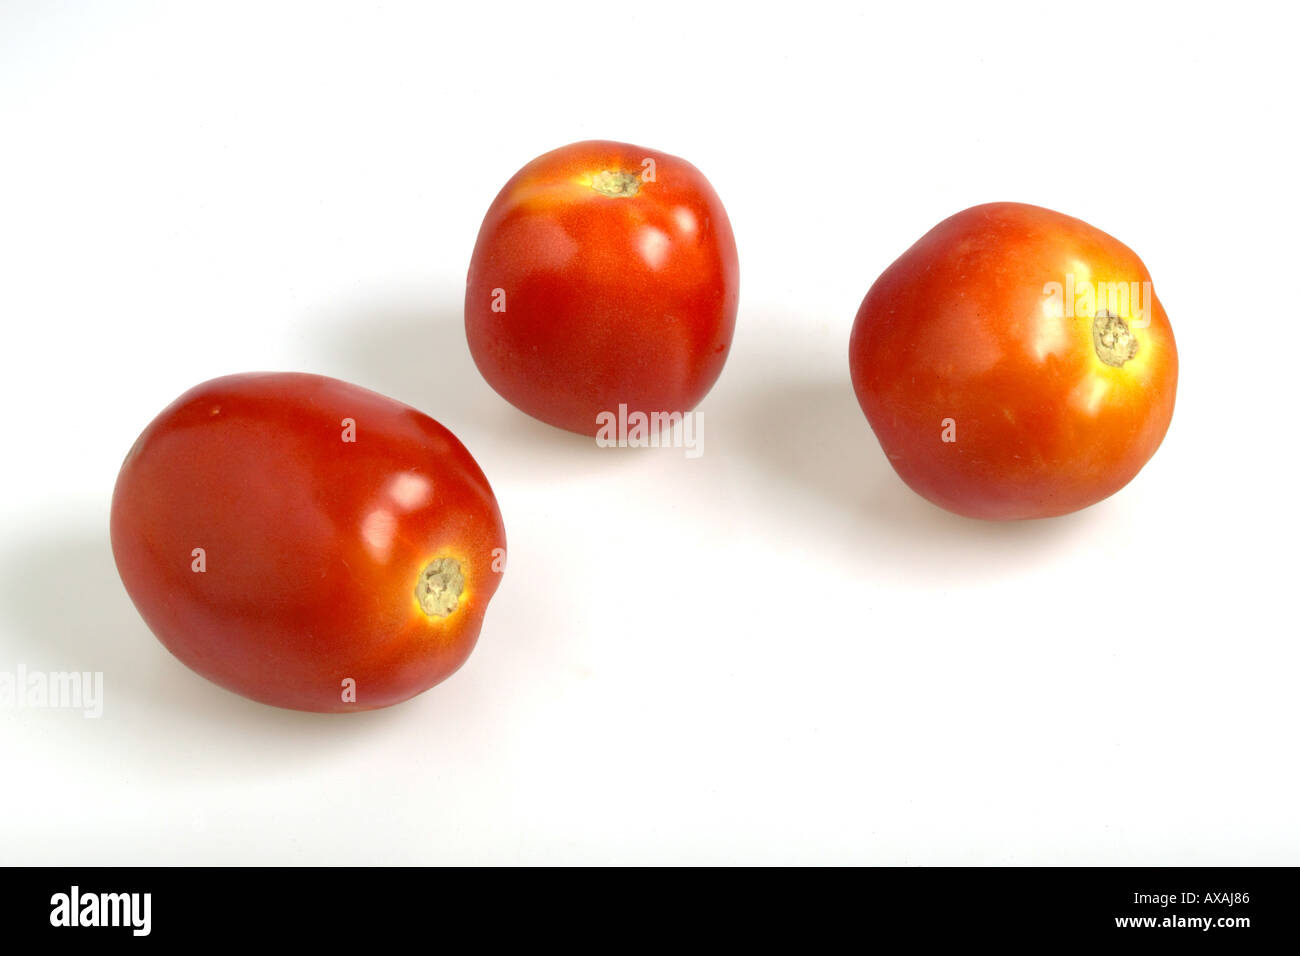 AAD73228 Three red uncut vegetable tomatoes on white background double spread Stock Photo